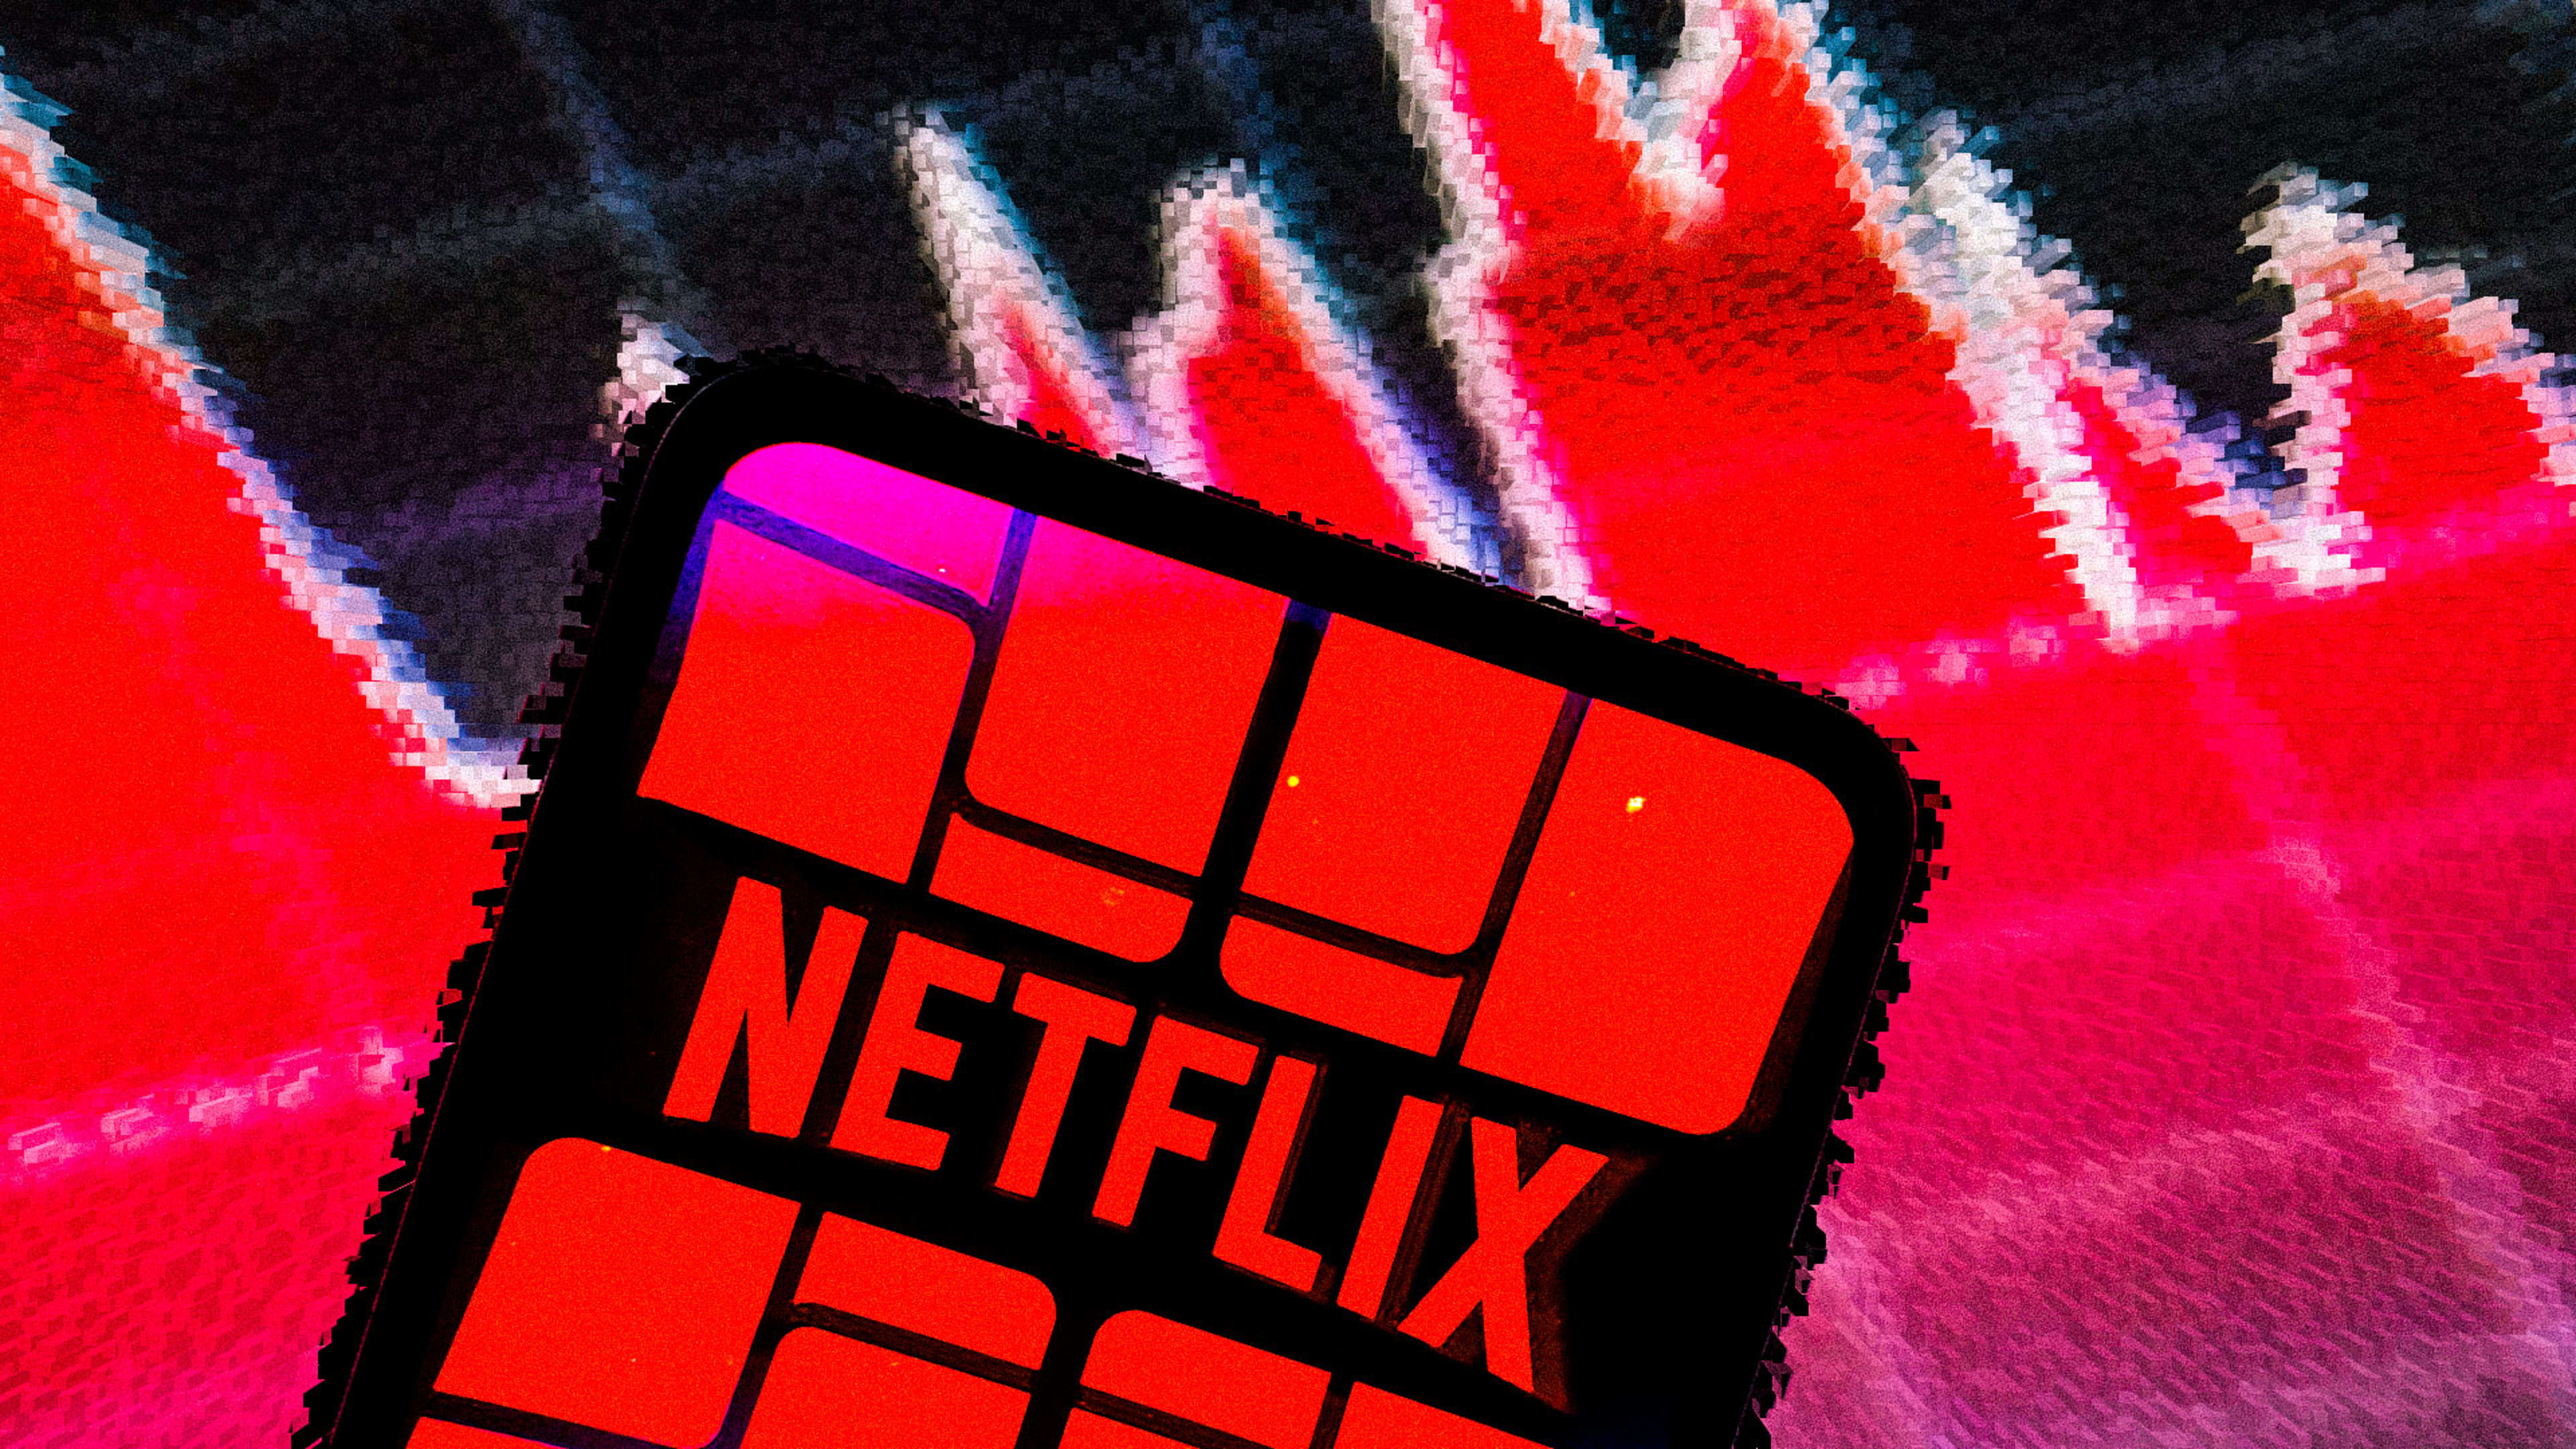 Netflix was expected to lose 2 million more subscribers. Can it pull off a Q2 earnings surprise?